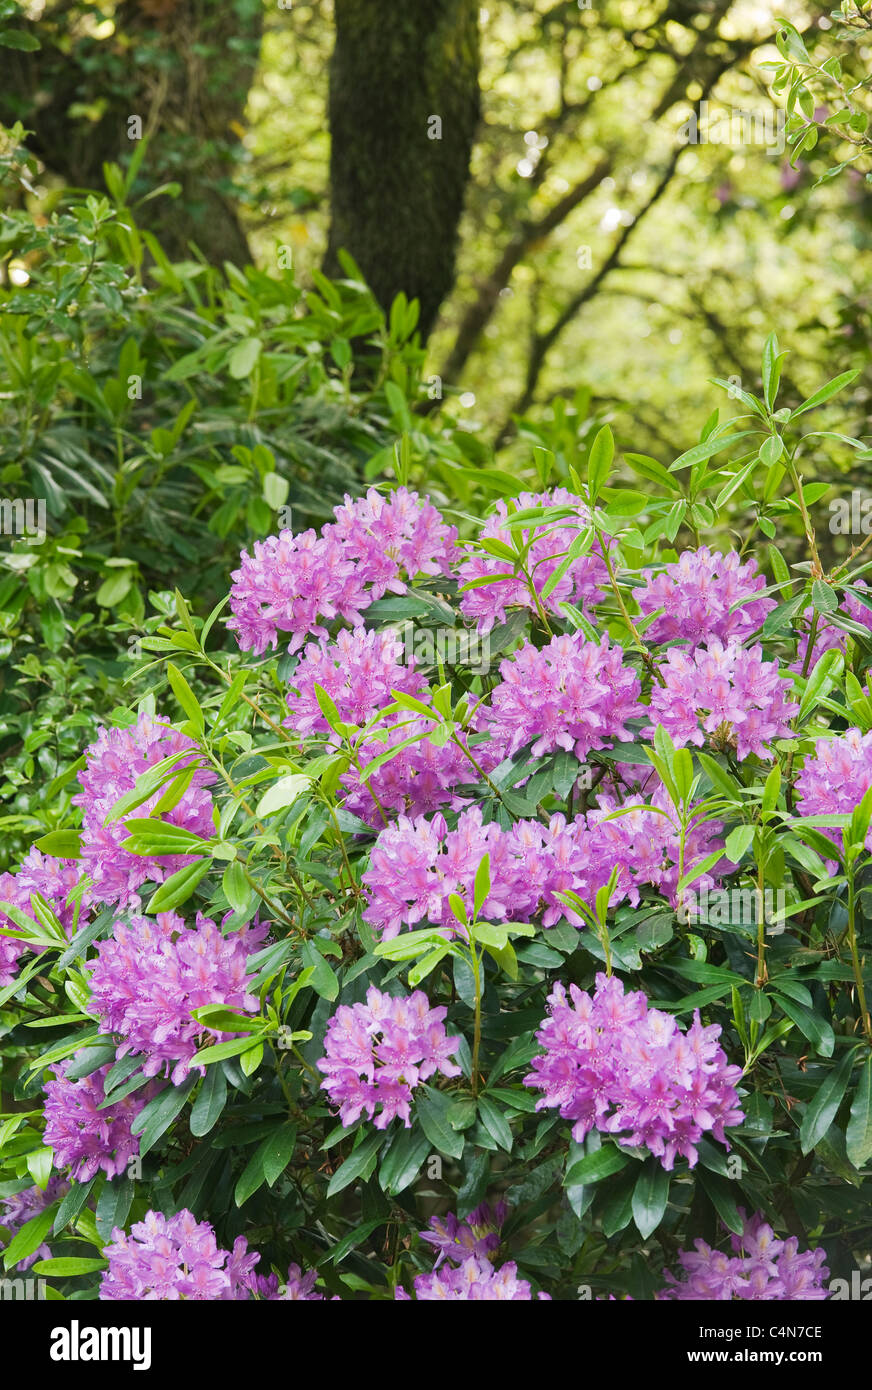 Rhododendron in bloom, Tresco island, Isles of Scilly, Cornwall, England, UK Stock Photo